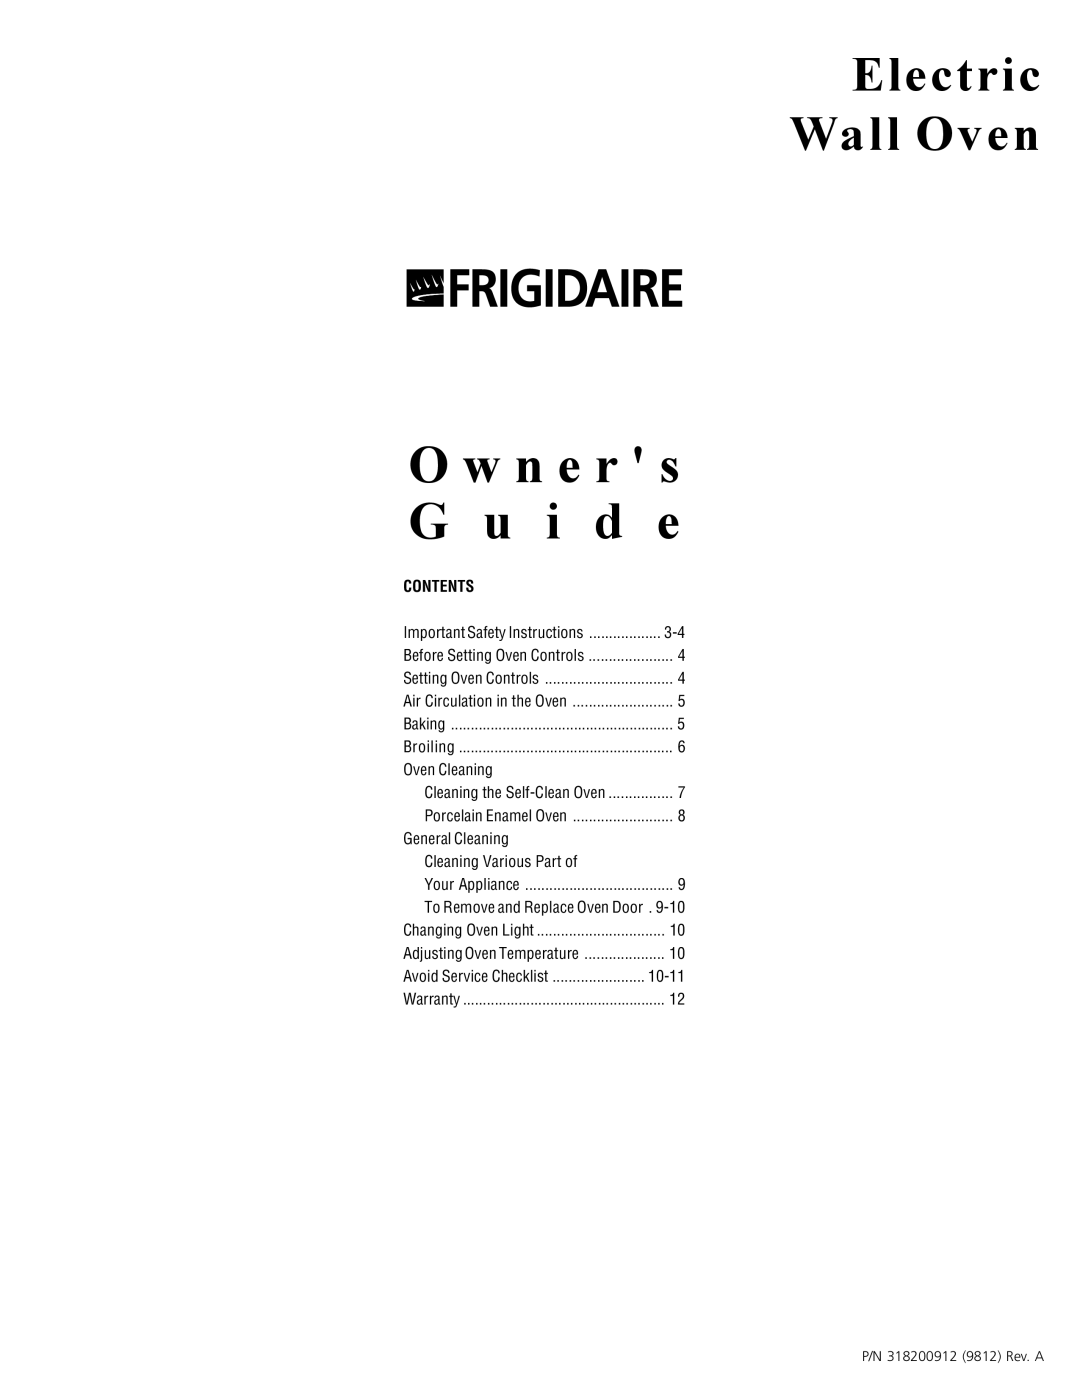 Frigidaire 318200912 important safety instructions O w n e r s G u i d e, Electric Wall Oven, Contents 